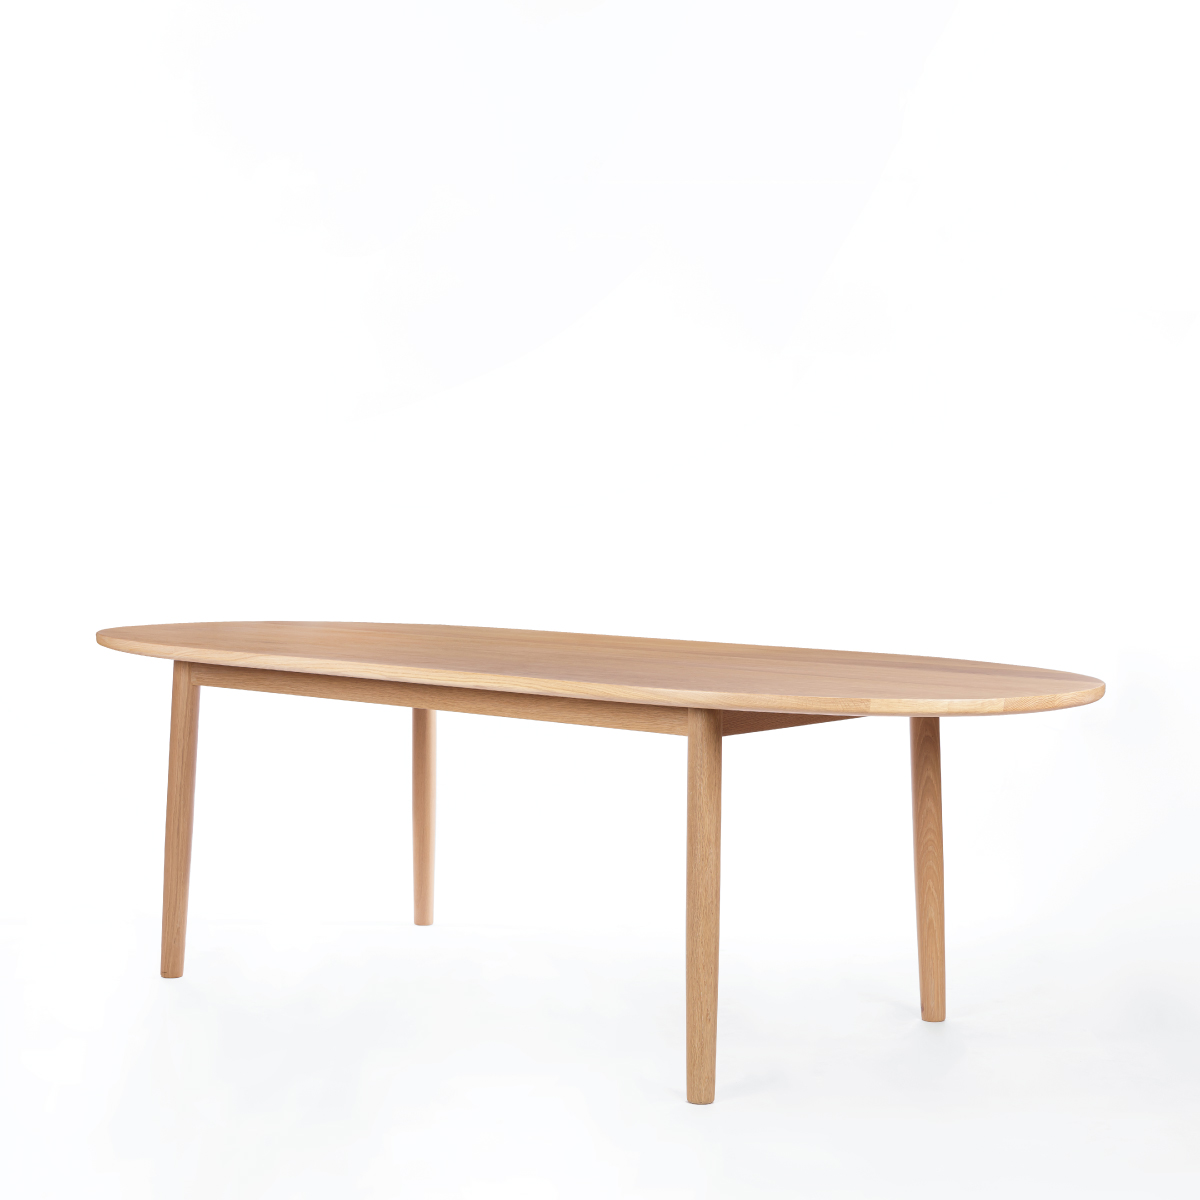 DT111 Cosmos Oval Table